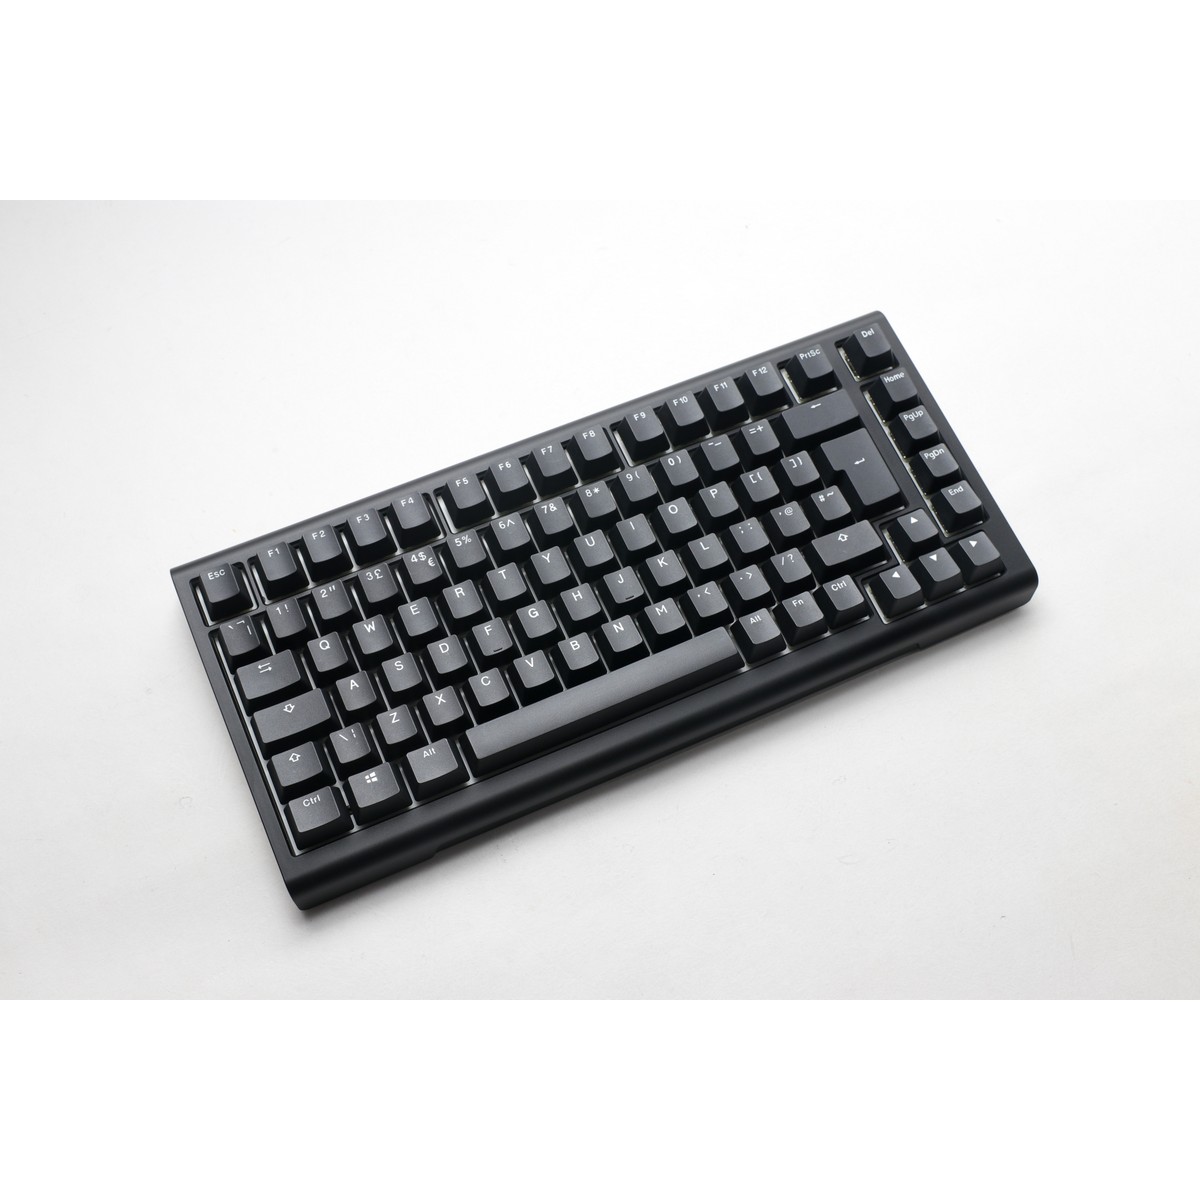 Ducky - Ducky Project D Tinker 75% RGB USB Mechanical Gaming Keyboard Cherry MX Red - UK